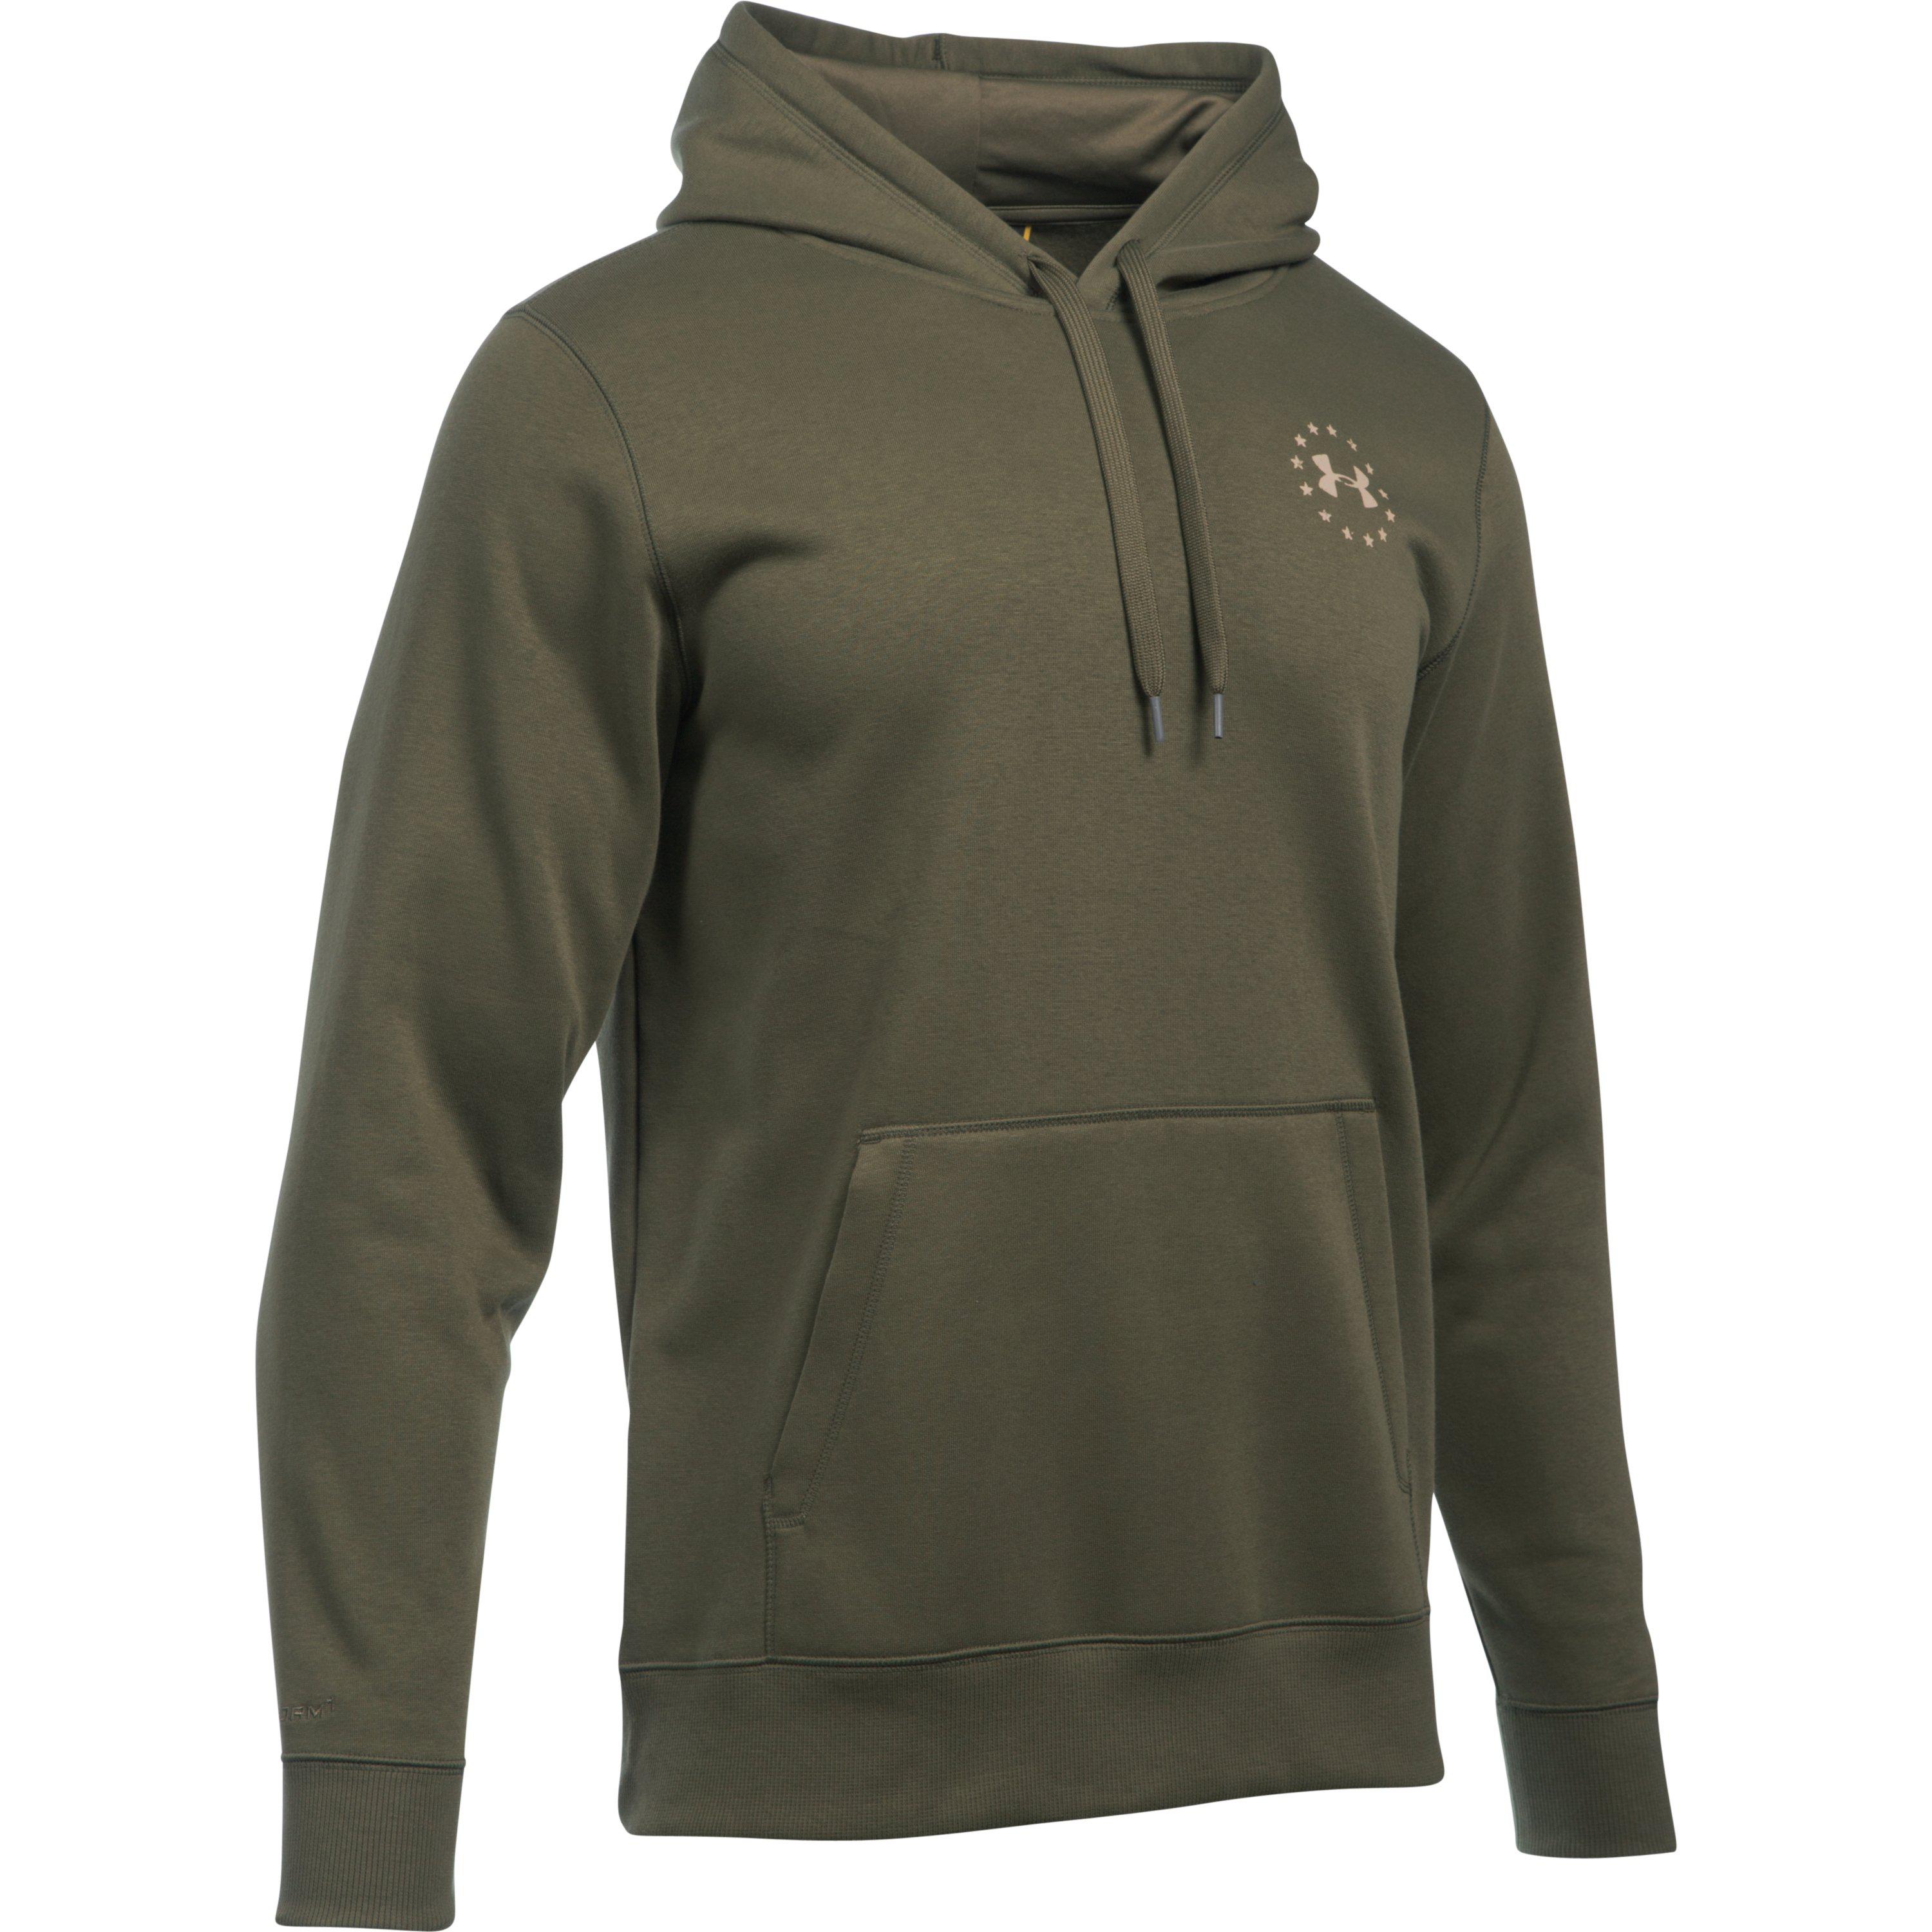 Under Armour Cotton Men's Ua Freedom Flag Hoodie in Marine od Green/  (Green) for Men - Lyst